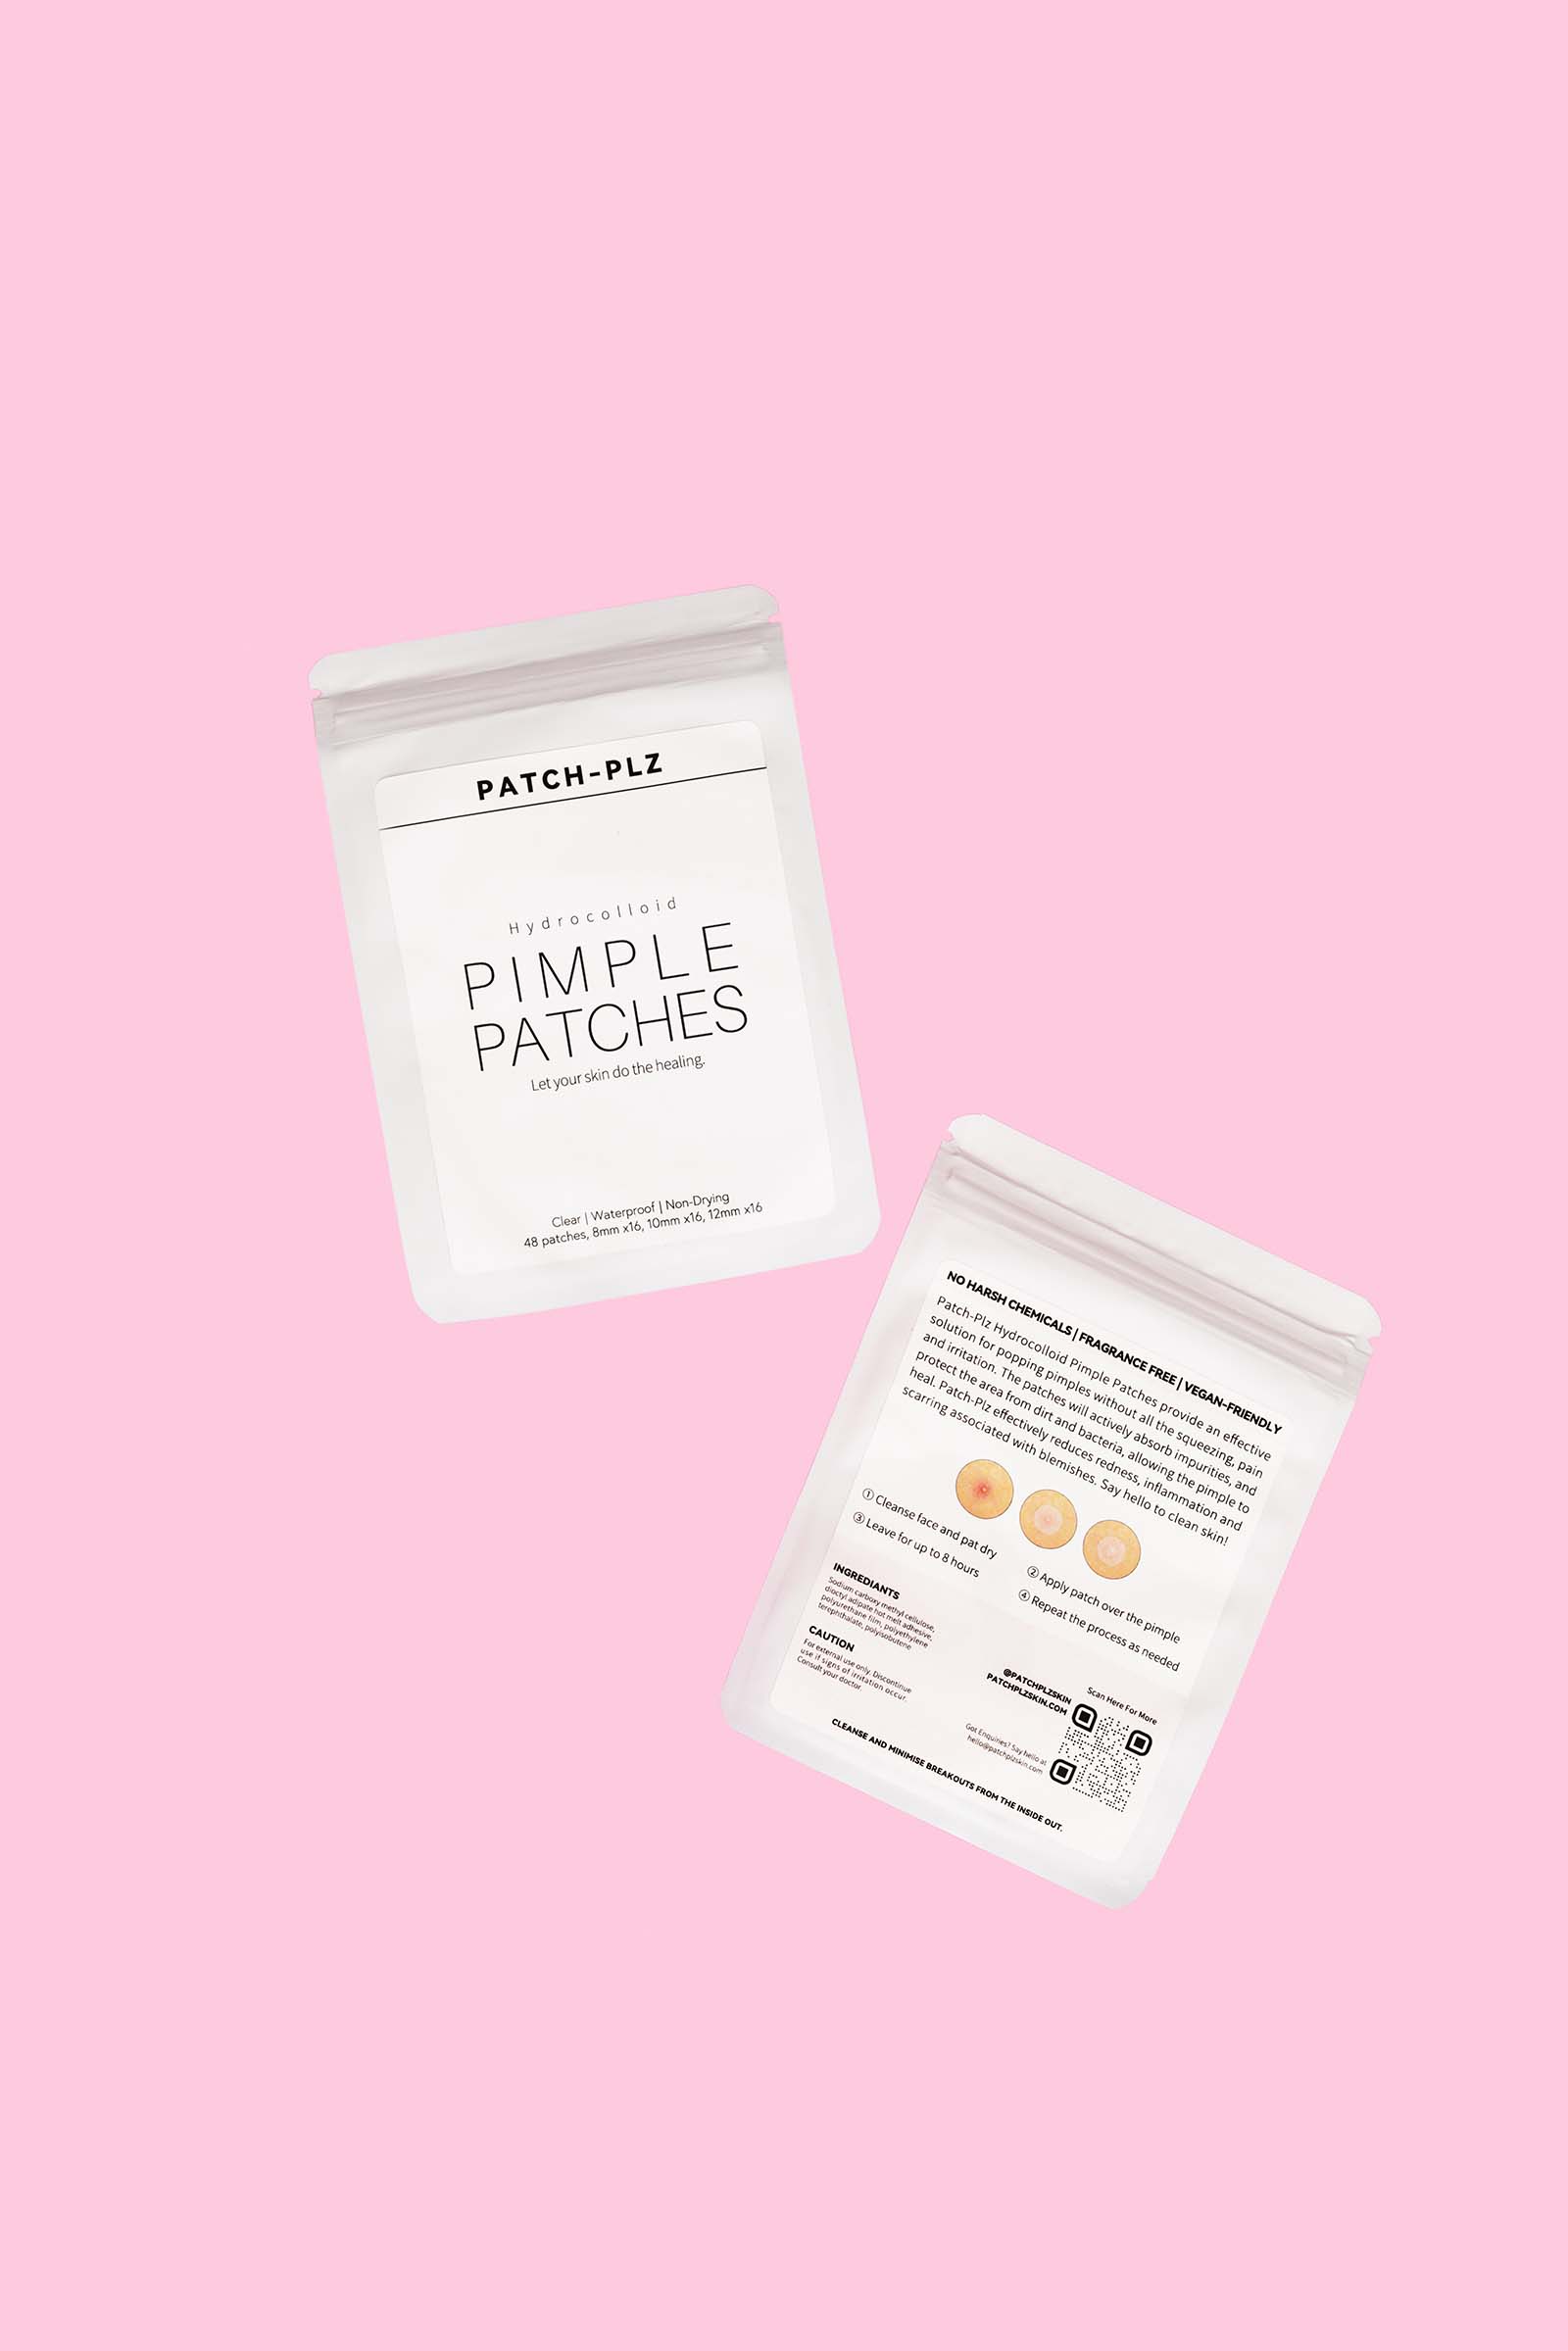 Pink product photography by Colourop Studio showcases Patch Plz's pimple-fighting patches